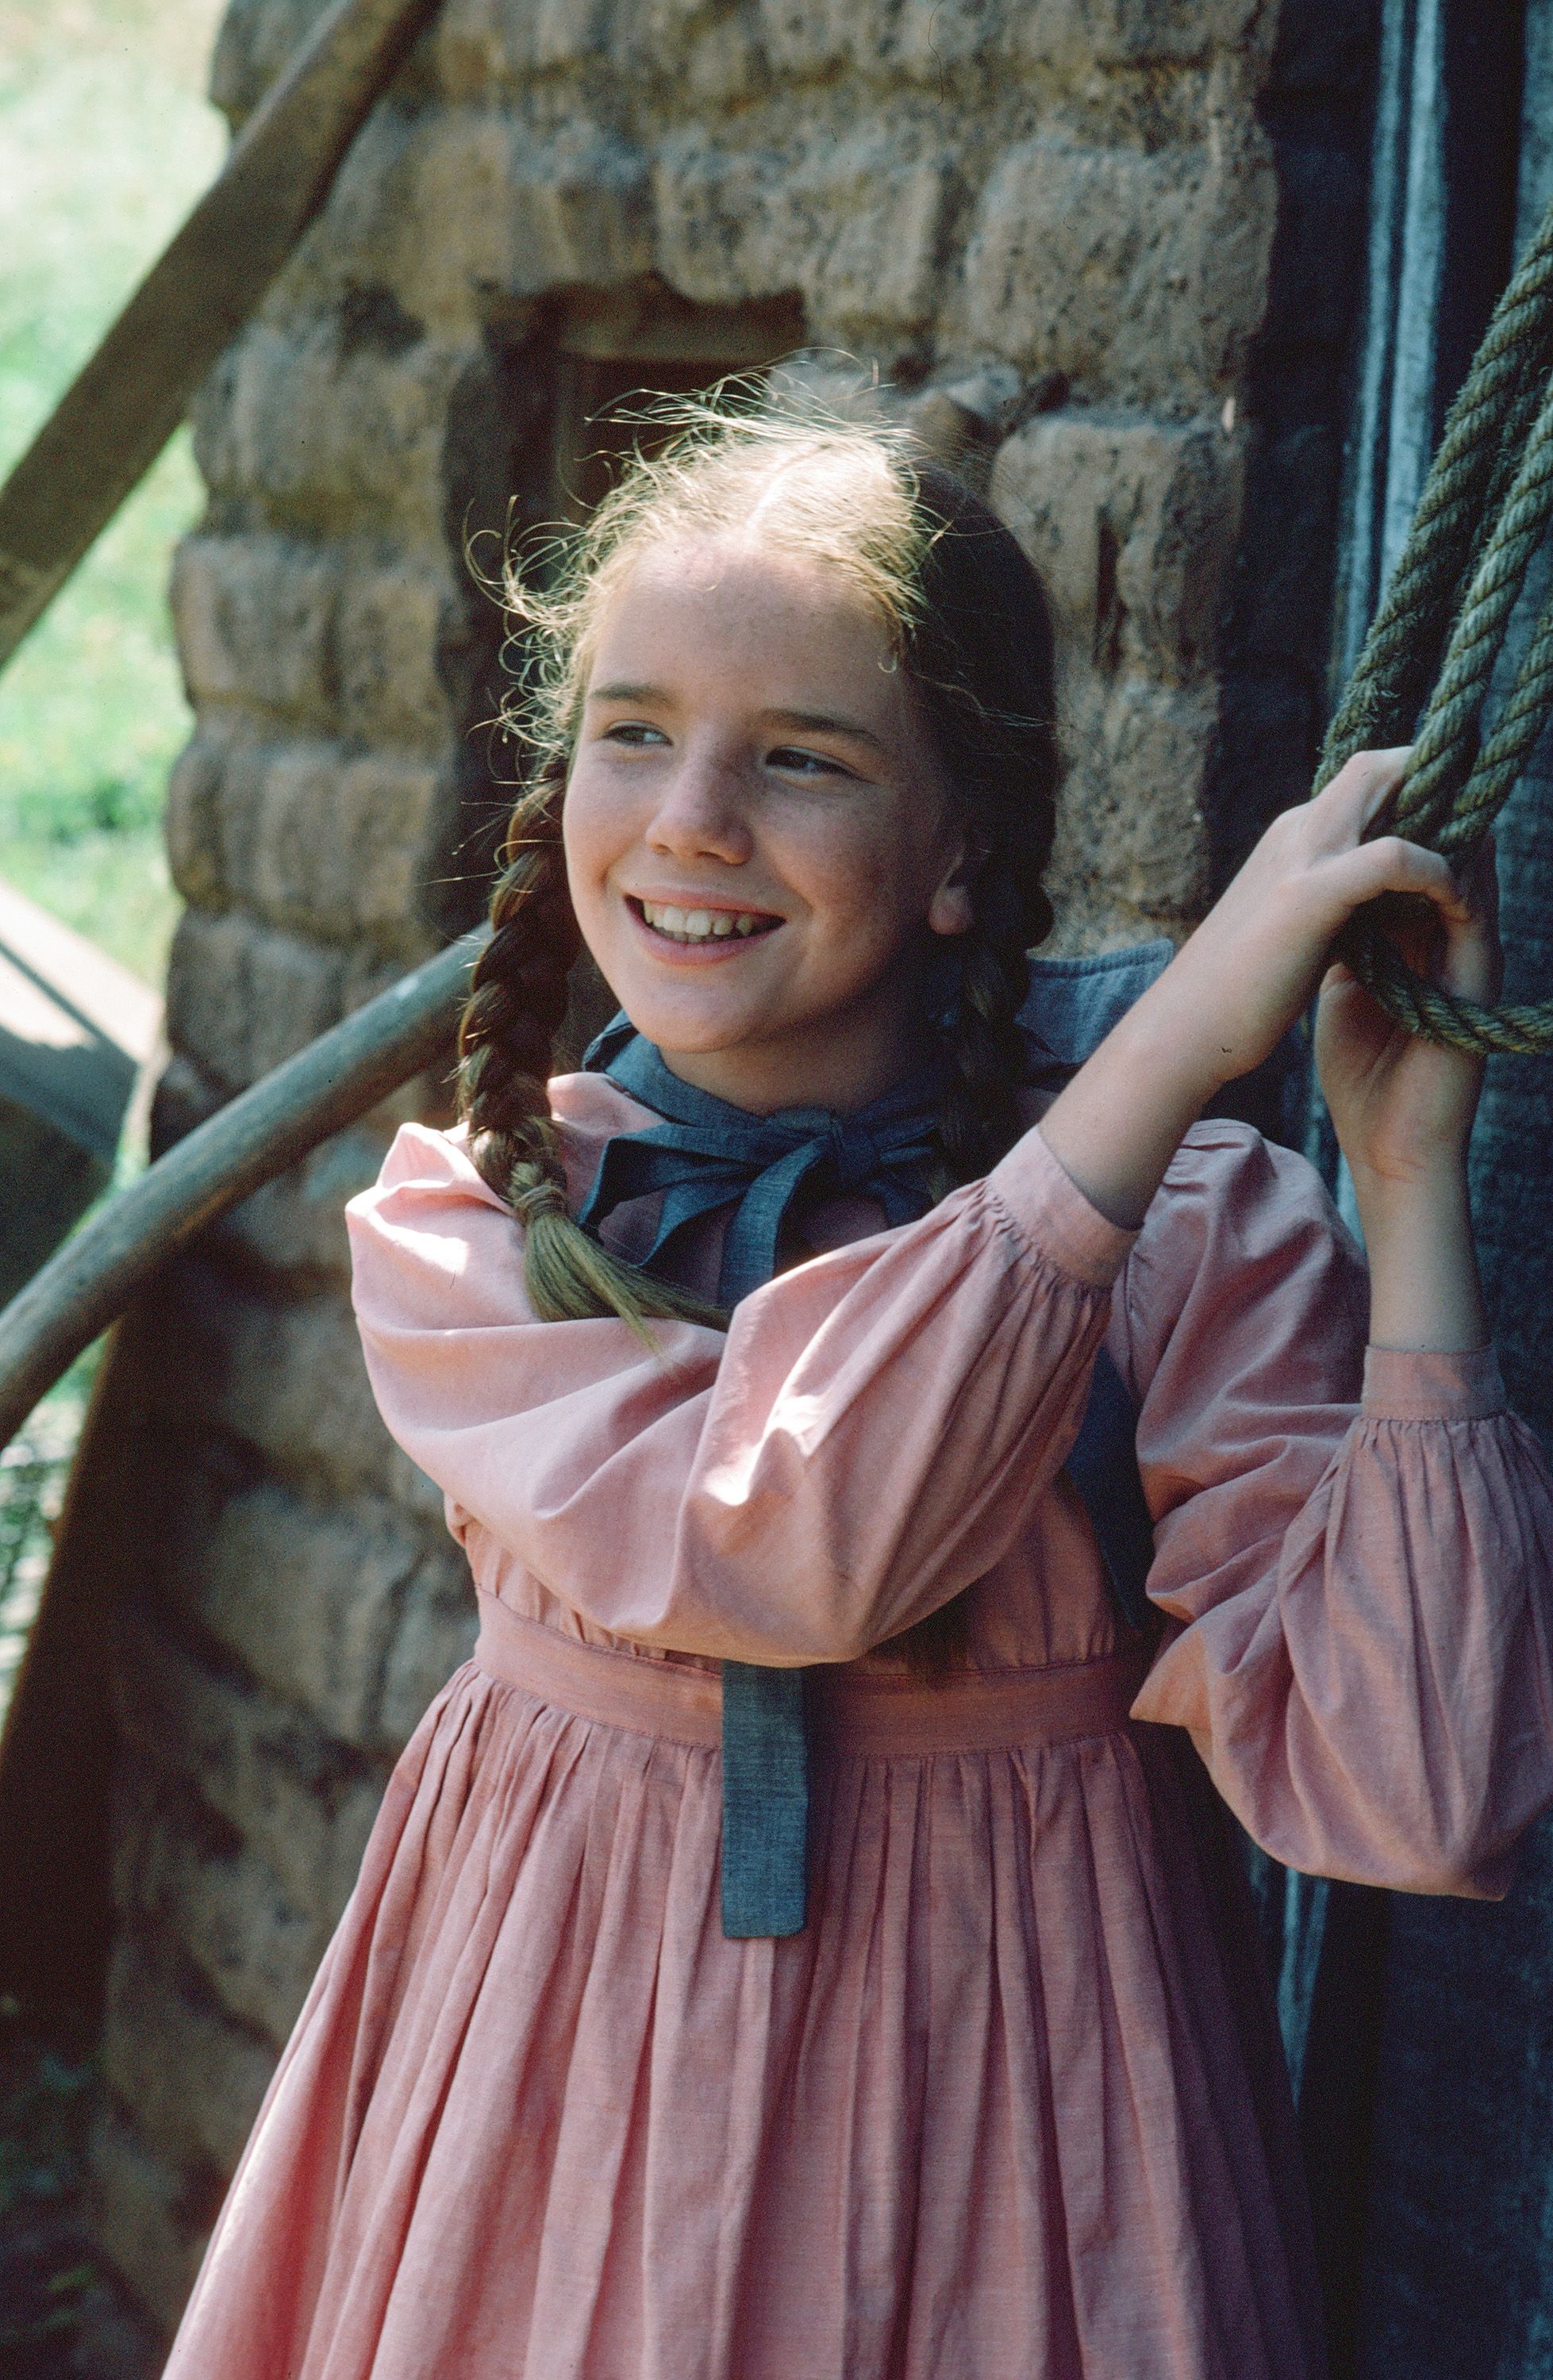 little house on the prairie complete series openload download free